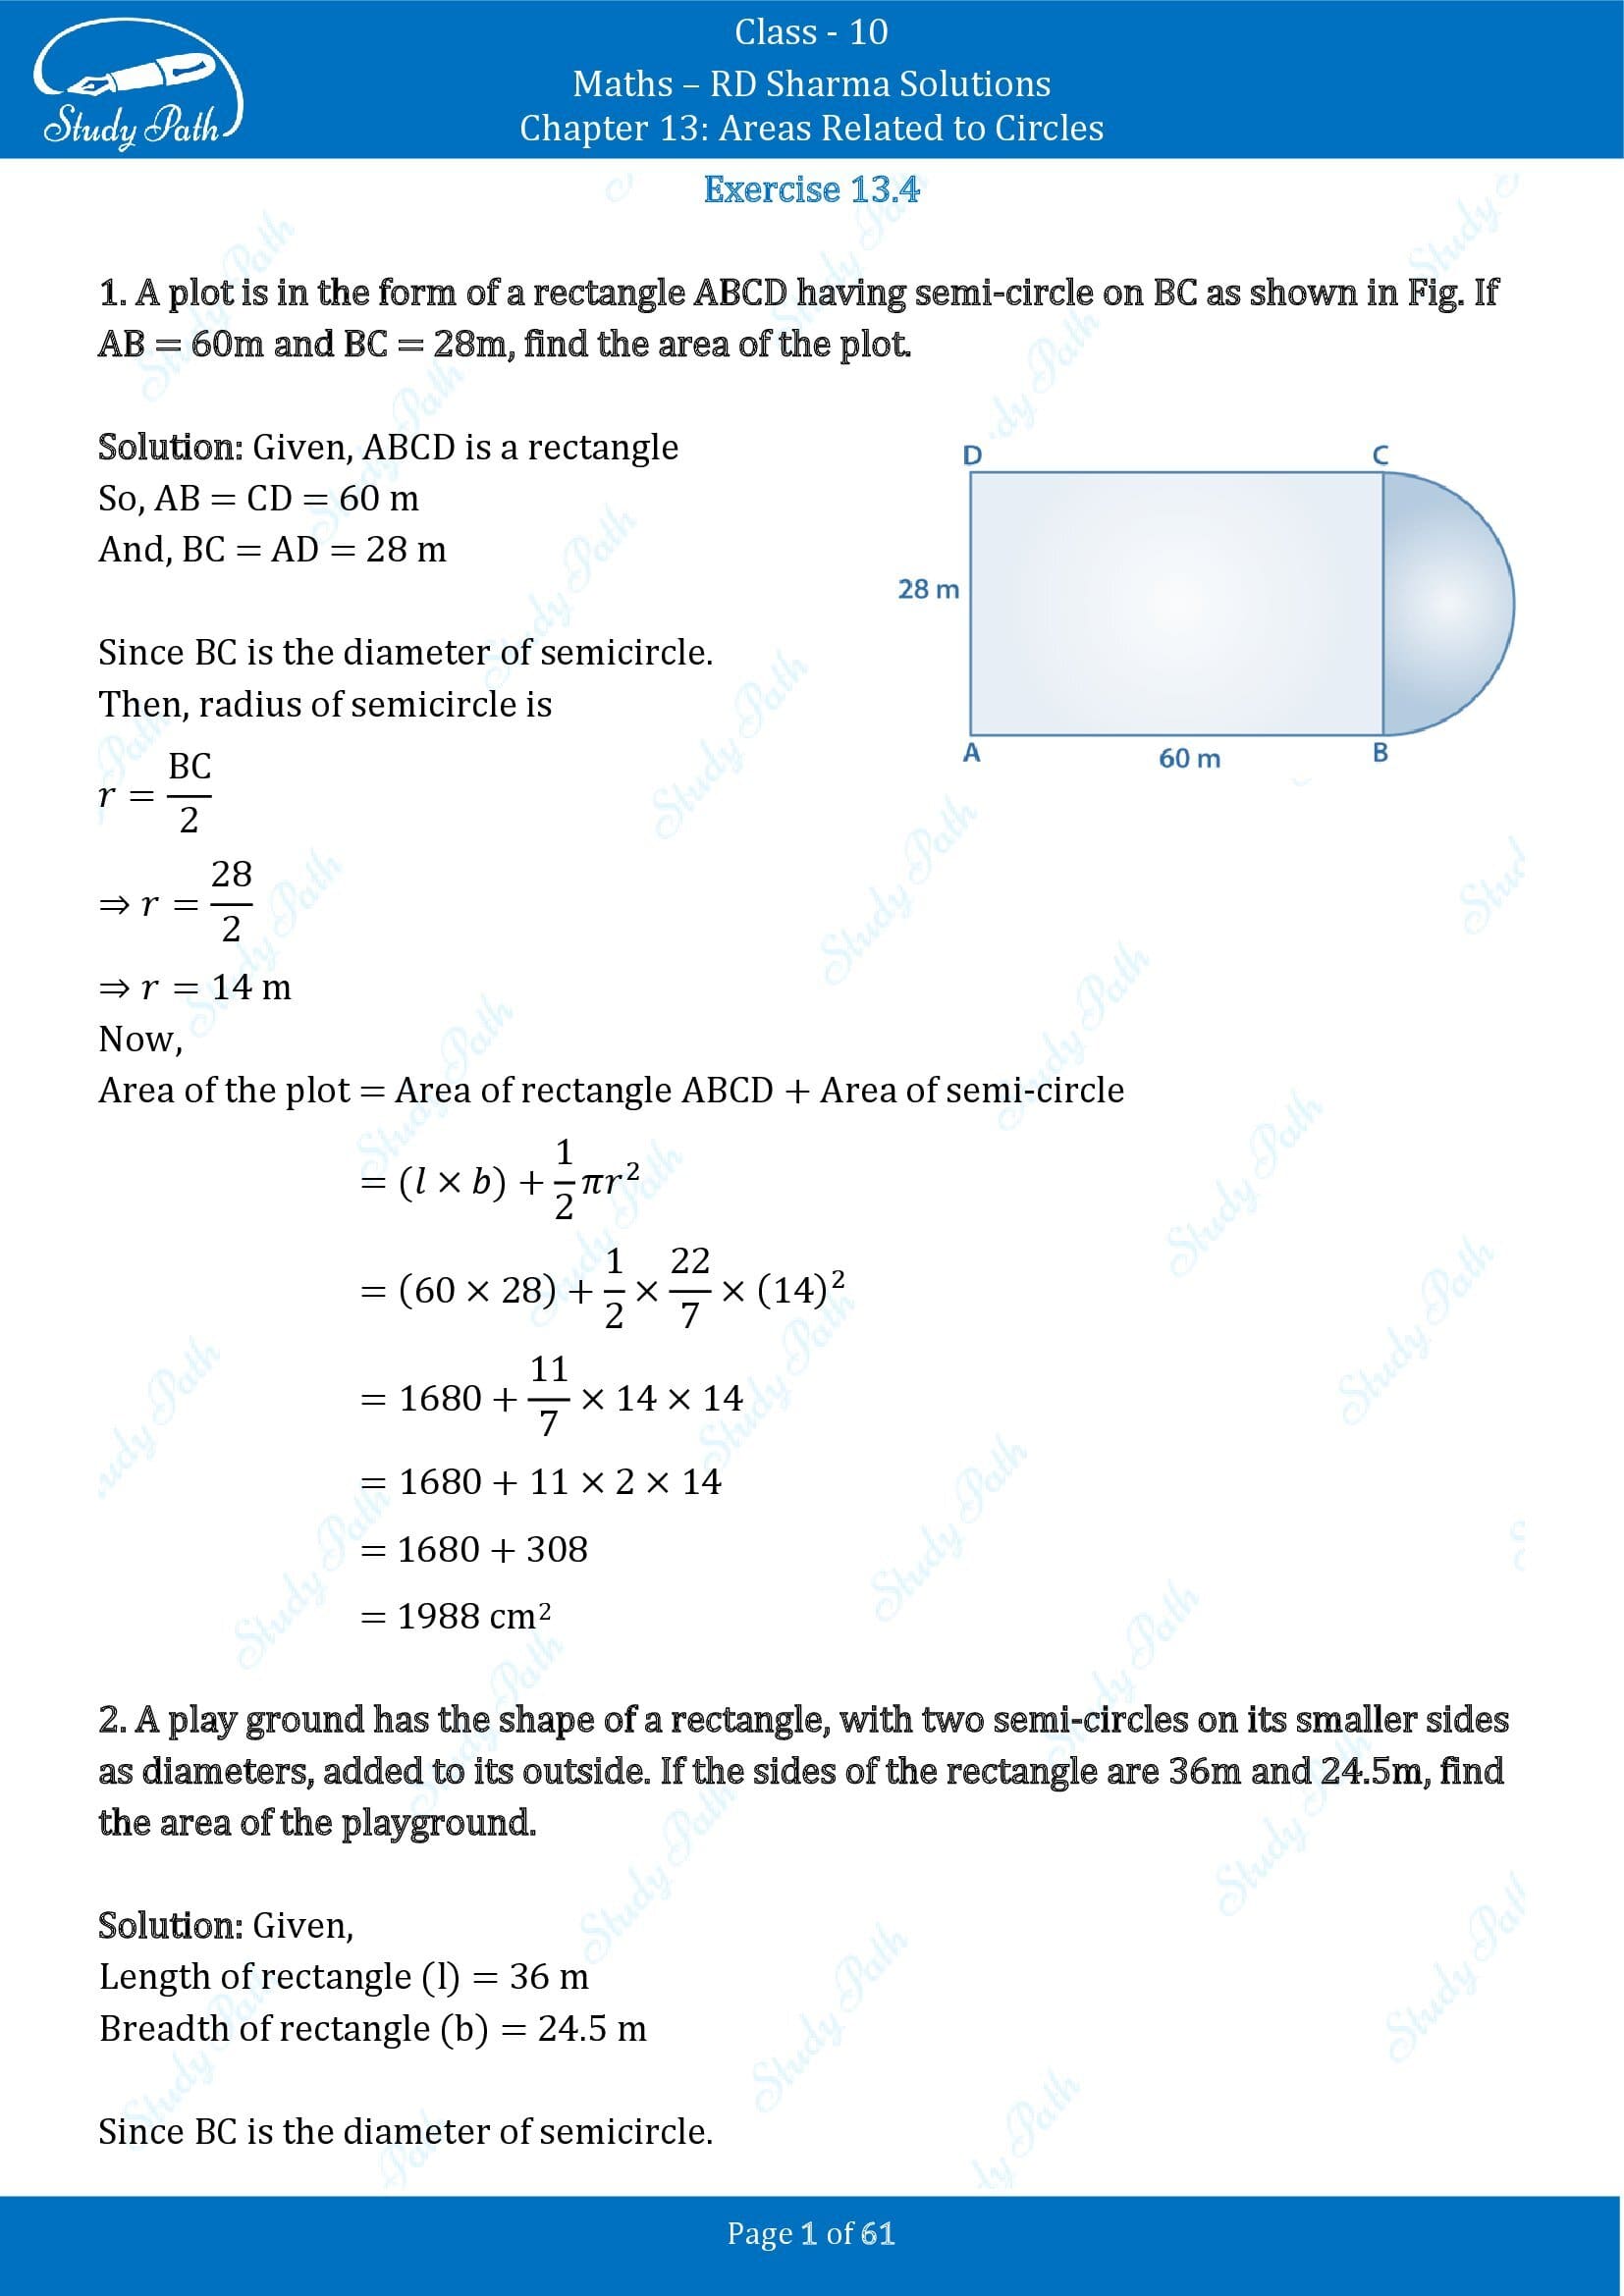 RD Sharma Solutions Class 10 Chapter 13 Areas Related to Circles Exercise 13.4 00001